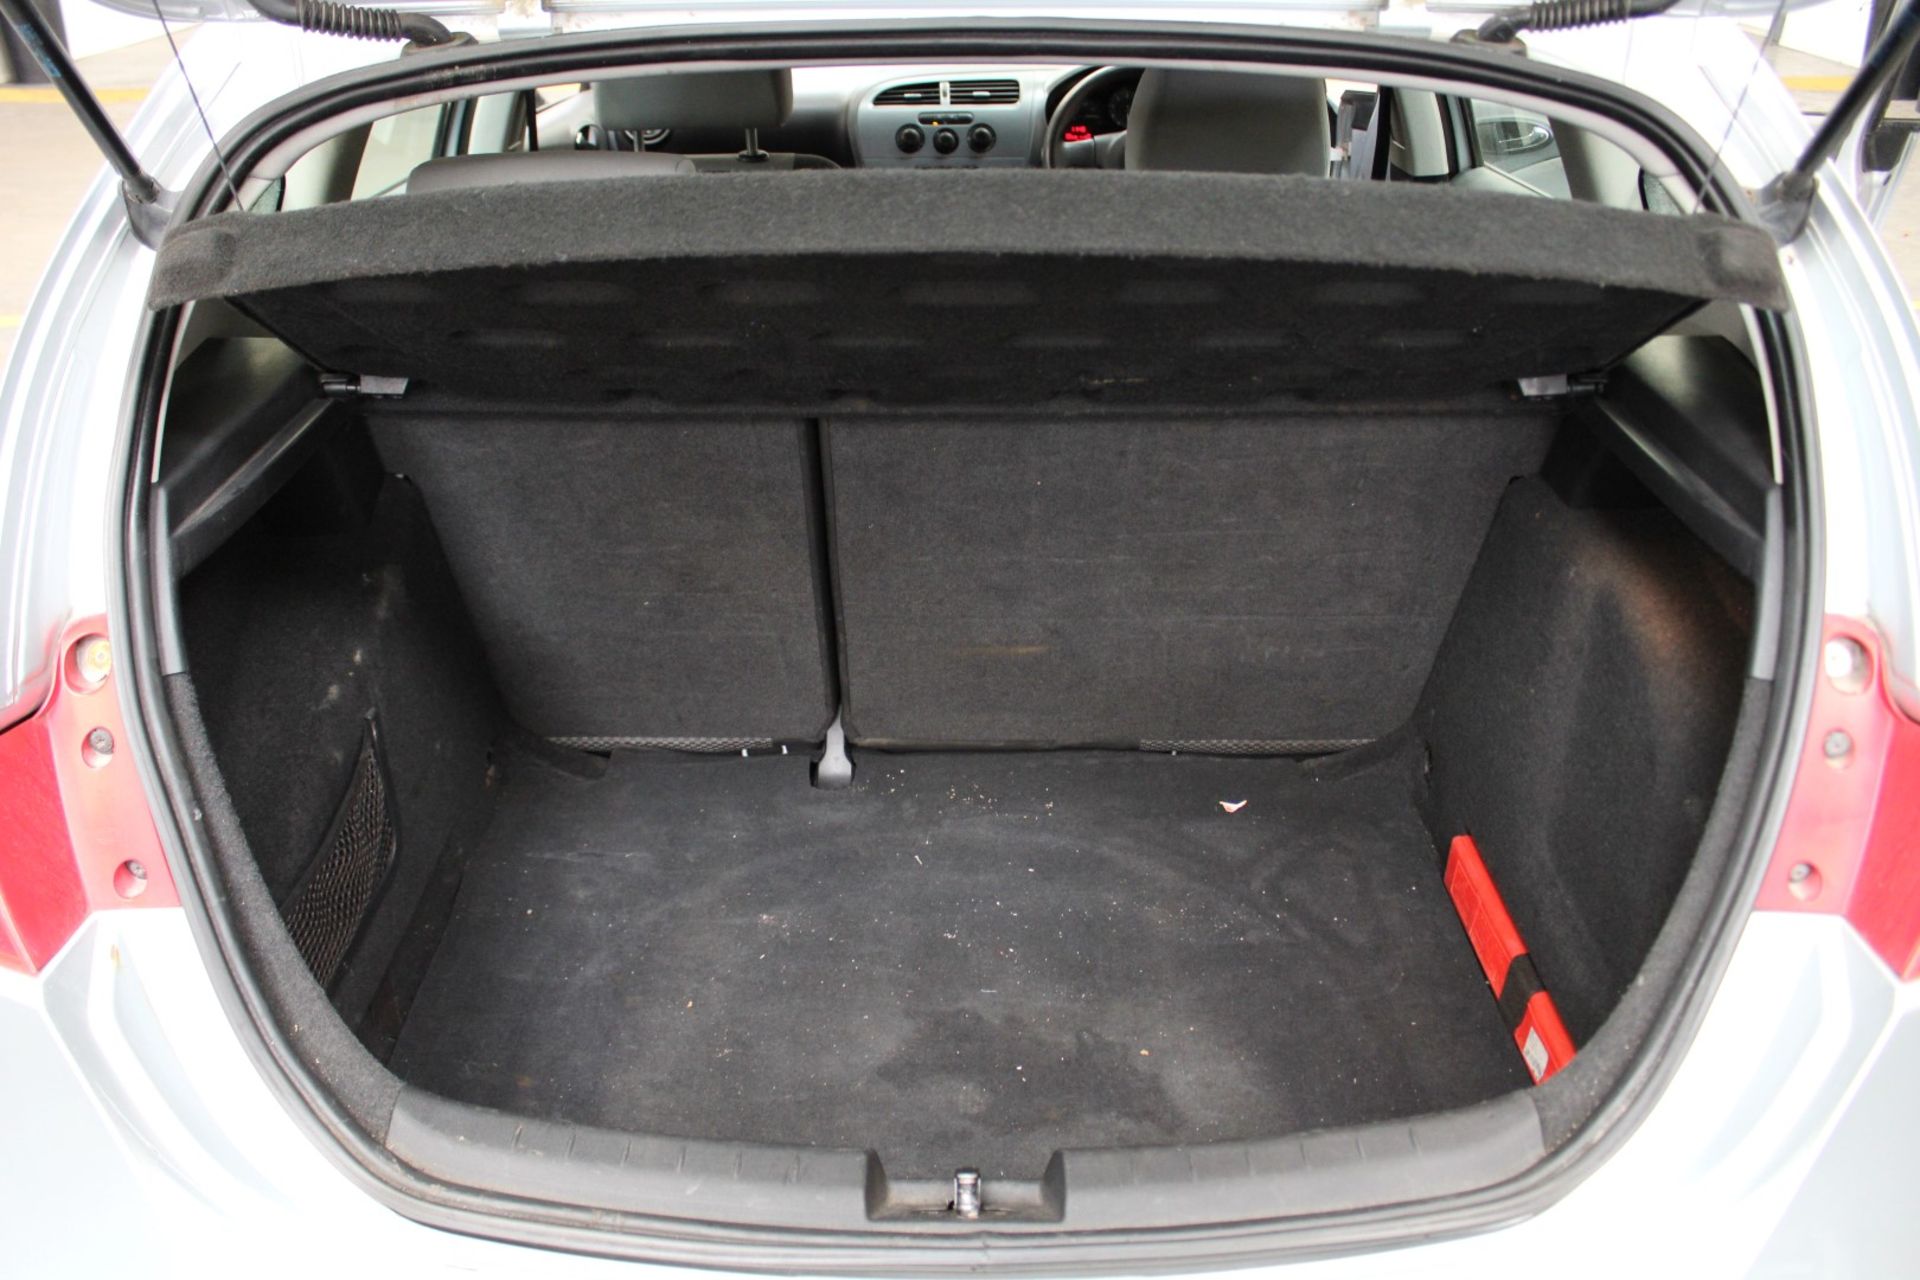 55 05 Seat Leon Reference - Image 27 of 32